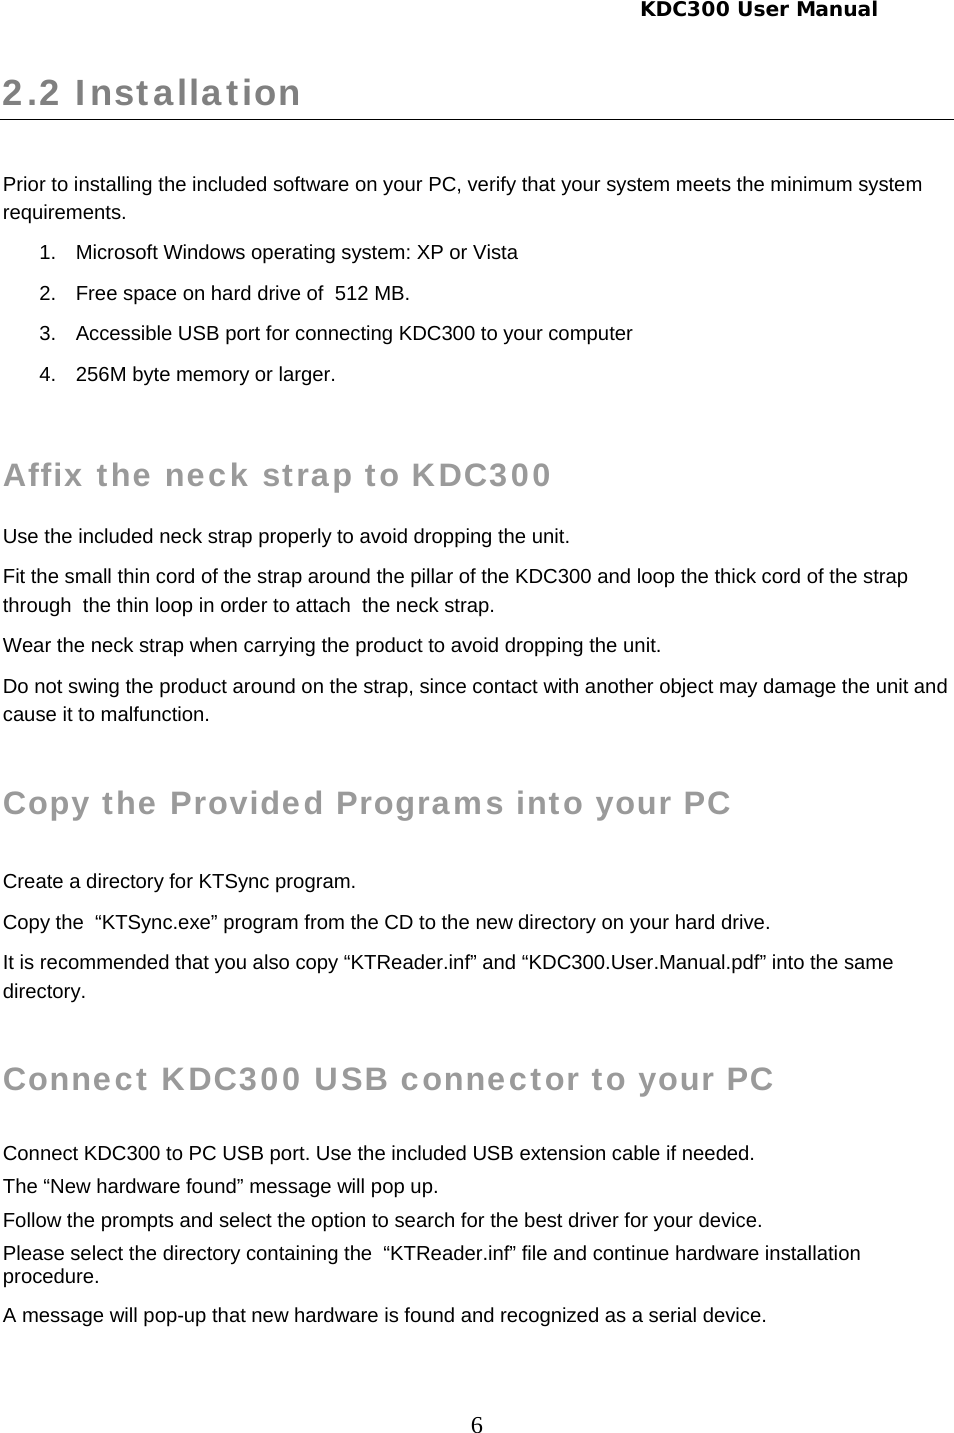     KDC300 User Manual 6 2.2 Installation   Prior to installing the included software on your PC, verify that your system meets the minimum system requirements. 1.  Microsoft Windows operating system: XP or Vista 2.  Free space on hard drive of  512 MB. 3.  Accessible USB port for connecting KDC300 to your computer 4.  256M byte memory or larger.  Affix the neck strap to KDC300 Use the included neck strap properly to avoid dropping the unit. Fit the small thin cord of the strap around the pillar of the KDC300 and loop the thick cord of the strap through  the thin loop in order to attach  the neck strap. Wear the neck strap when carrying the product to avoid dropping the unit. Do not swing the product around on the strap, since contact with another object may damage the unit and cause it to malfunction.    Copy the Provided Programs into your PC  Create a directory for KTSync program. Copy the  “KTSync.exe” program from the CD to the new directory on your hard drive. It is recommended that you also copy “KTReader.inf” and “KDC300.User.Manual.pdf” into the same directory.  Connect KDC300 USB connector to your PC  Connect KDC300 to PC USB port. Use the included USB extension cable if needed. The “New hardware found” message will pop up.  Follow the prompts and select the option to search for the best driver for your device. Please select the directory containing the  “KTReader.inf” file and continue hardware installation procedure. A message will pop-up that new hardware is found and recognized as a serial device.  